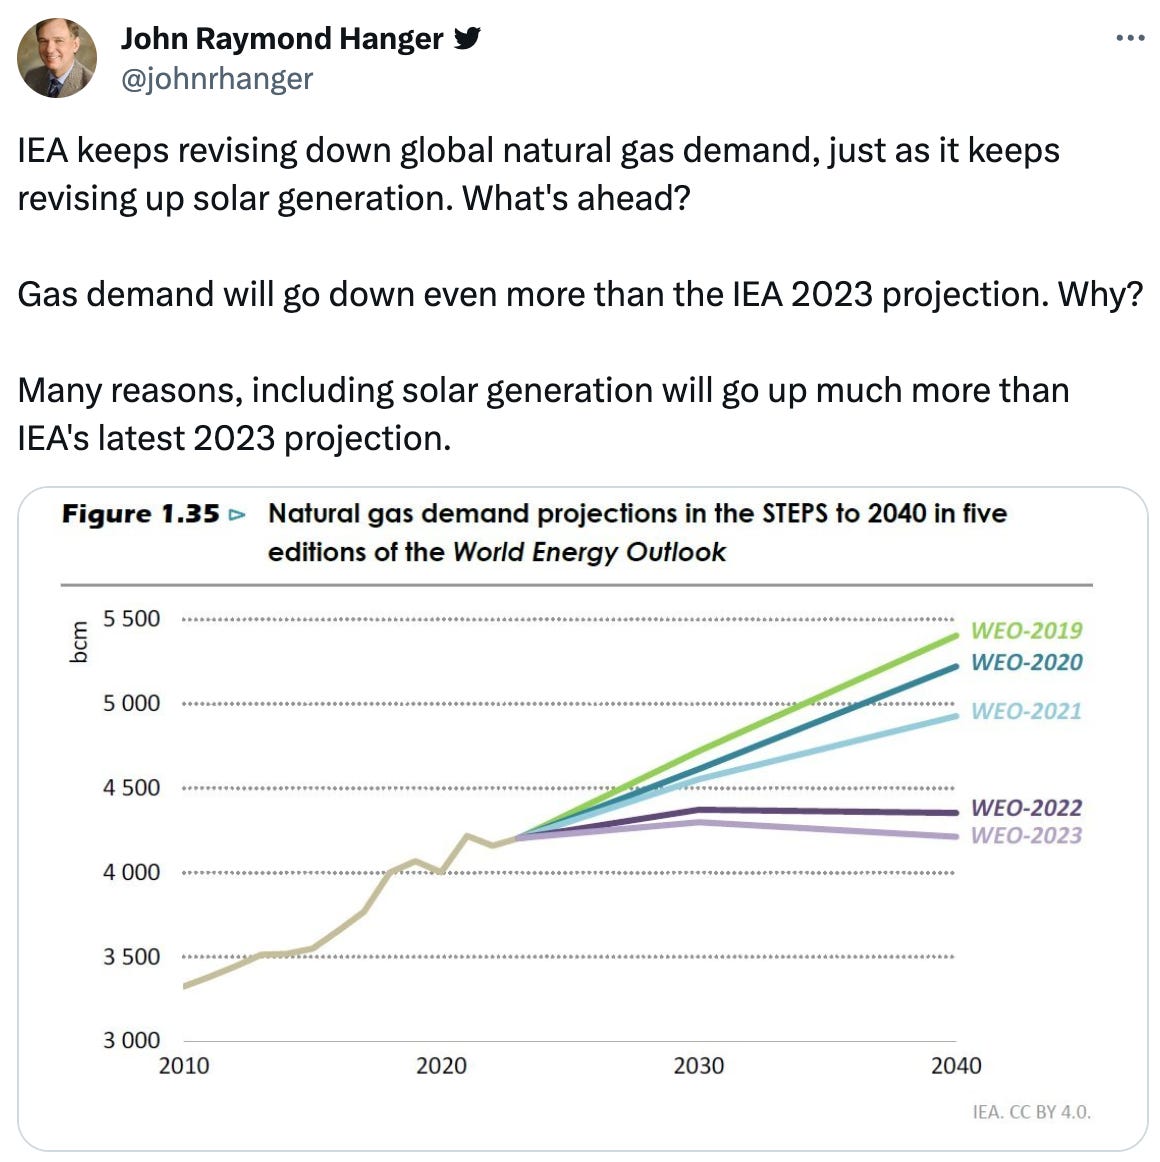  John Raymond Hanger  @johnrhanger IEA keeps revising down global natural gas demand, just as it keeps revising up solar generation. What's ahead?  Gas demand will go down even more than the IEA 2023 projection. Why?  Many reasons, including solar generation will go up much more than IEA's latest 2023 projection.